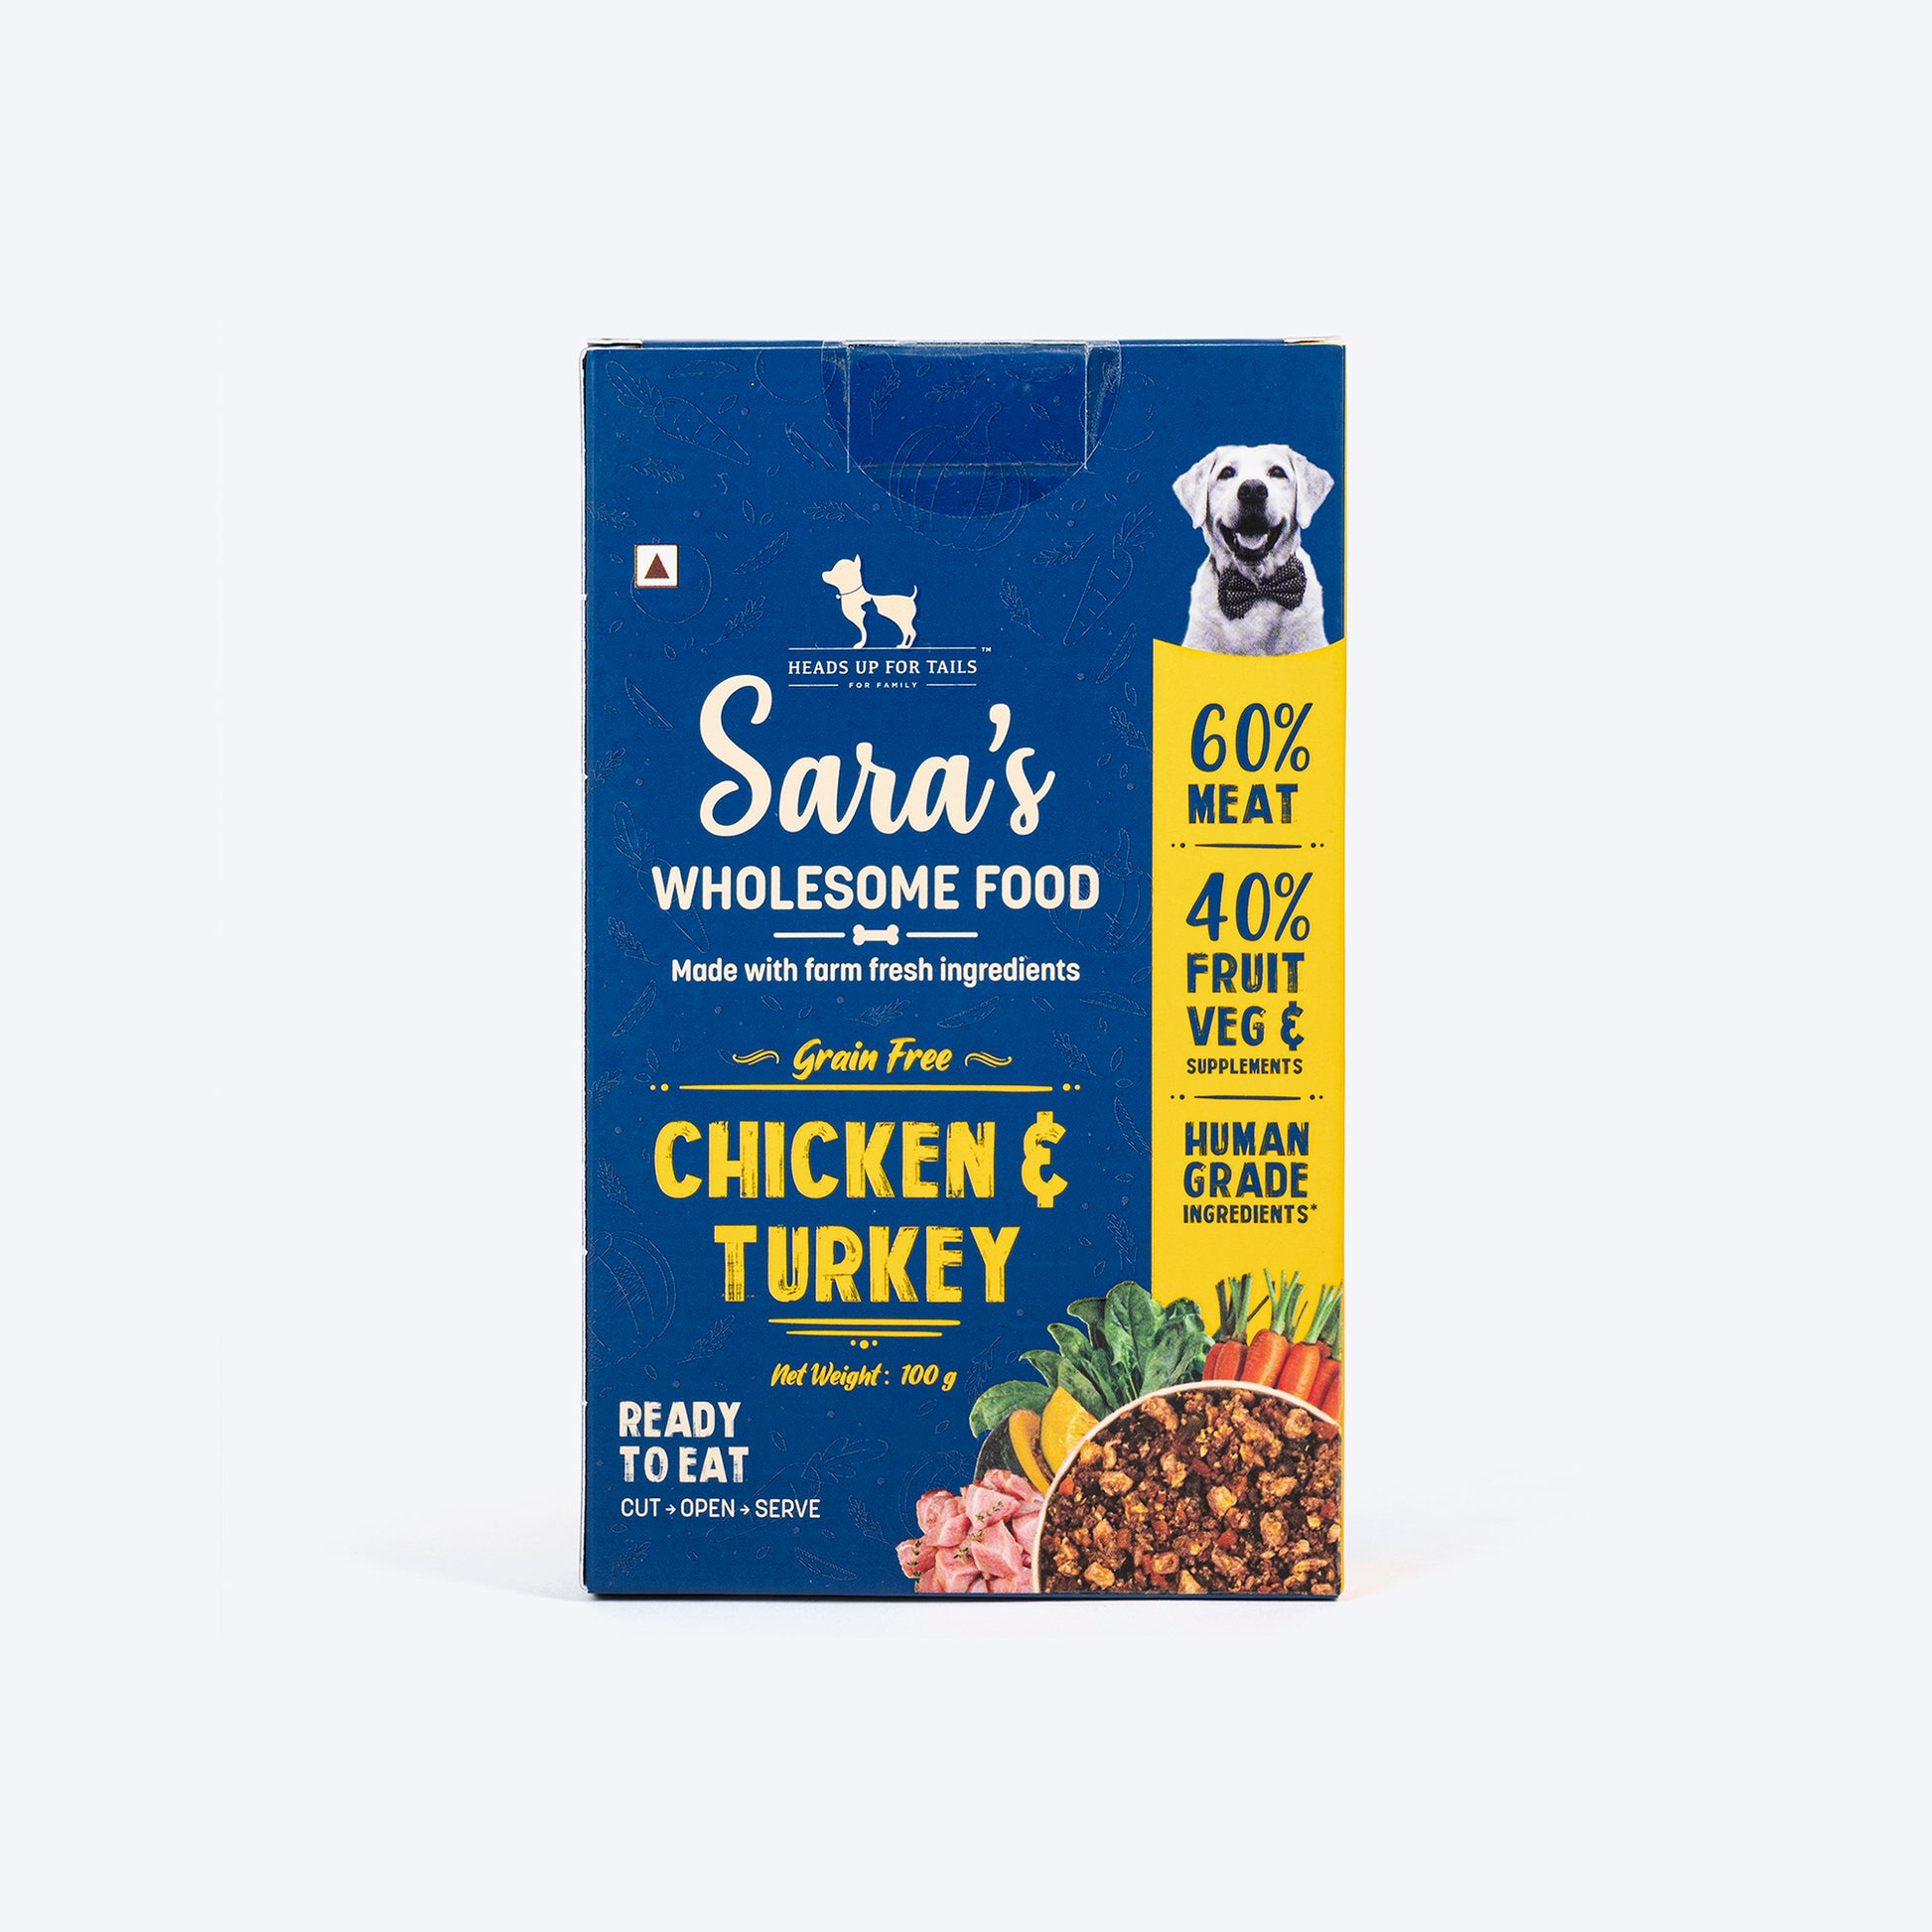 HUFT Sara's Wholesome Food - Classic Chicken & Brown Rice And Grain-Free Turkey Combo (2 x 100 g) - Heads Up For Tails